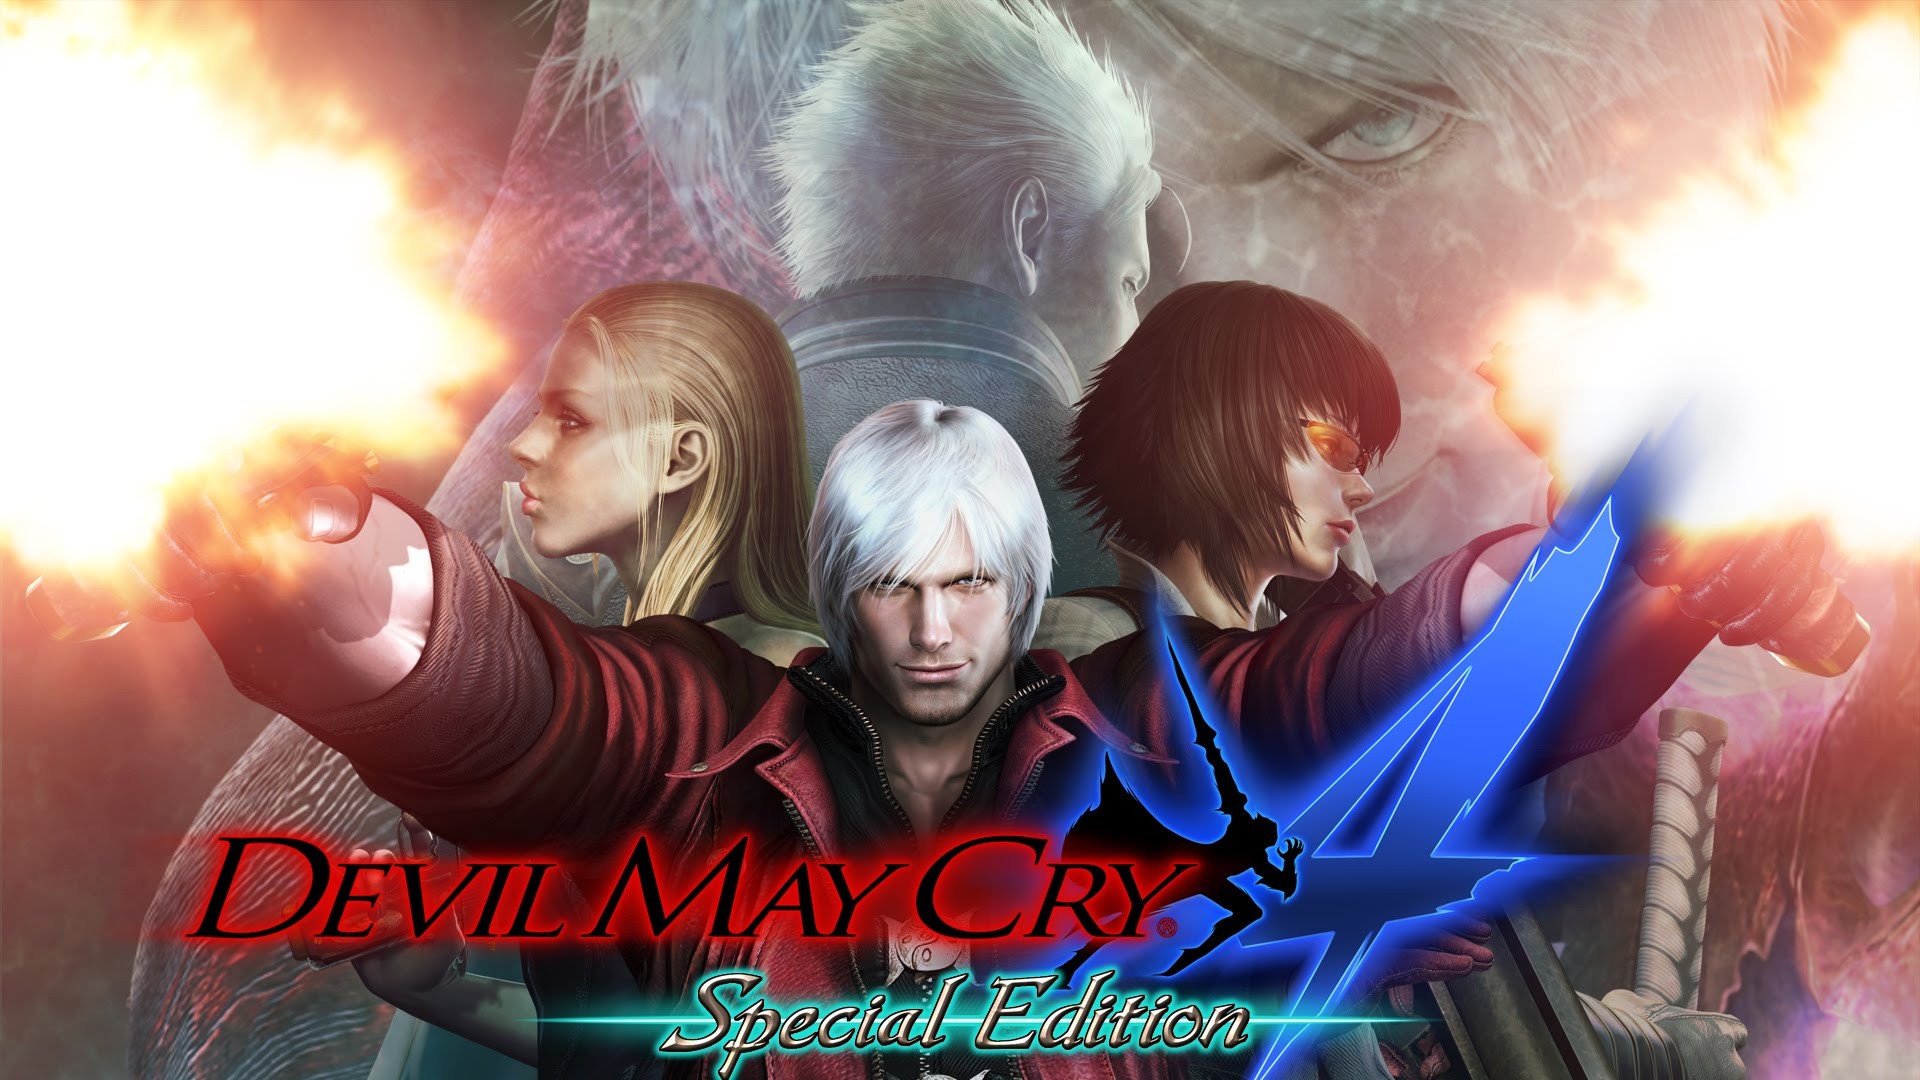 General 1920x1080 Devil May Cry Dante (Devil May Cry) Vergil Trish (Devil May Cry) Lady (Devil May Cry) video games video game art video game characters